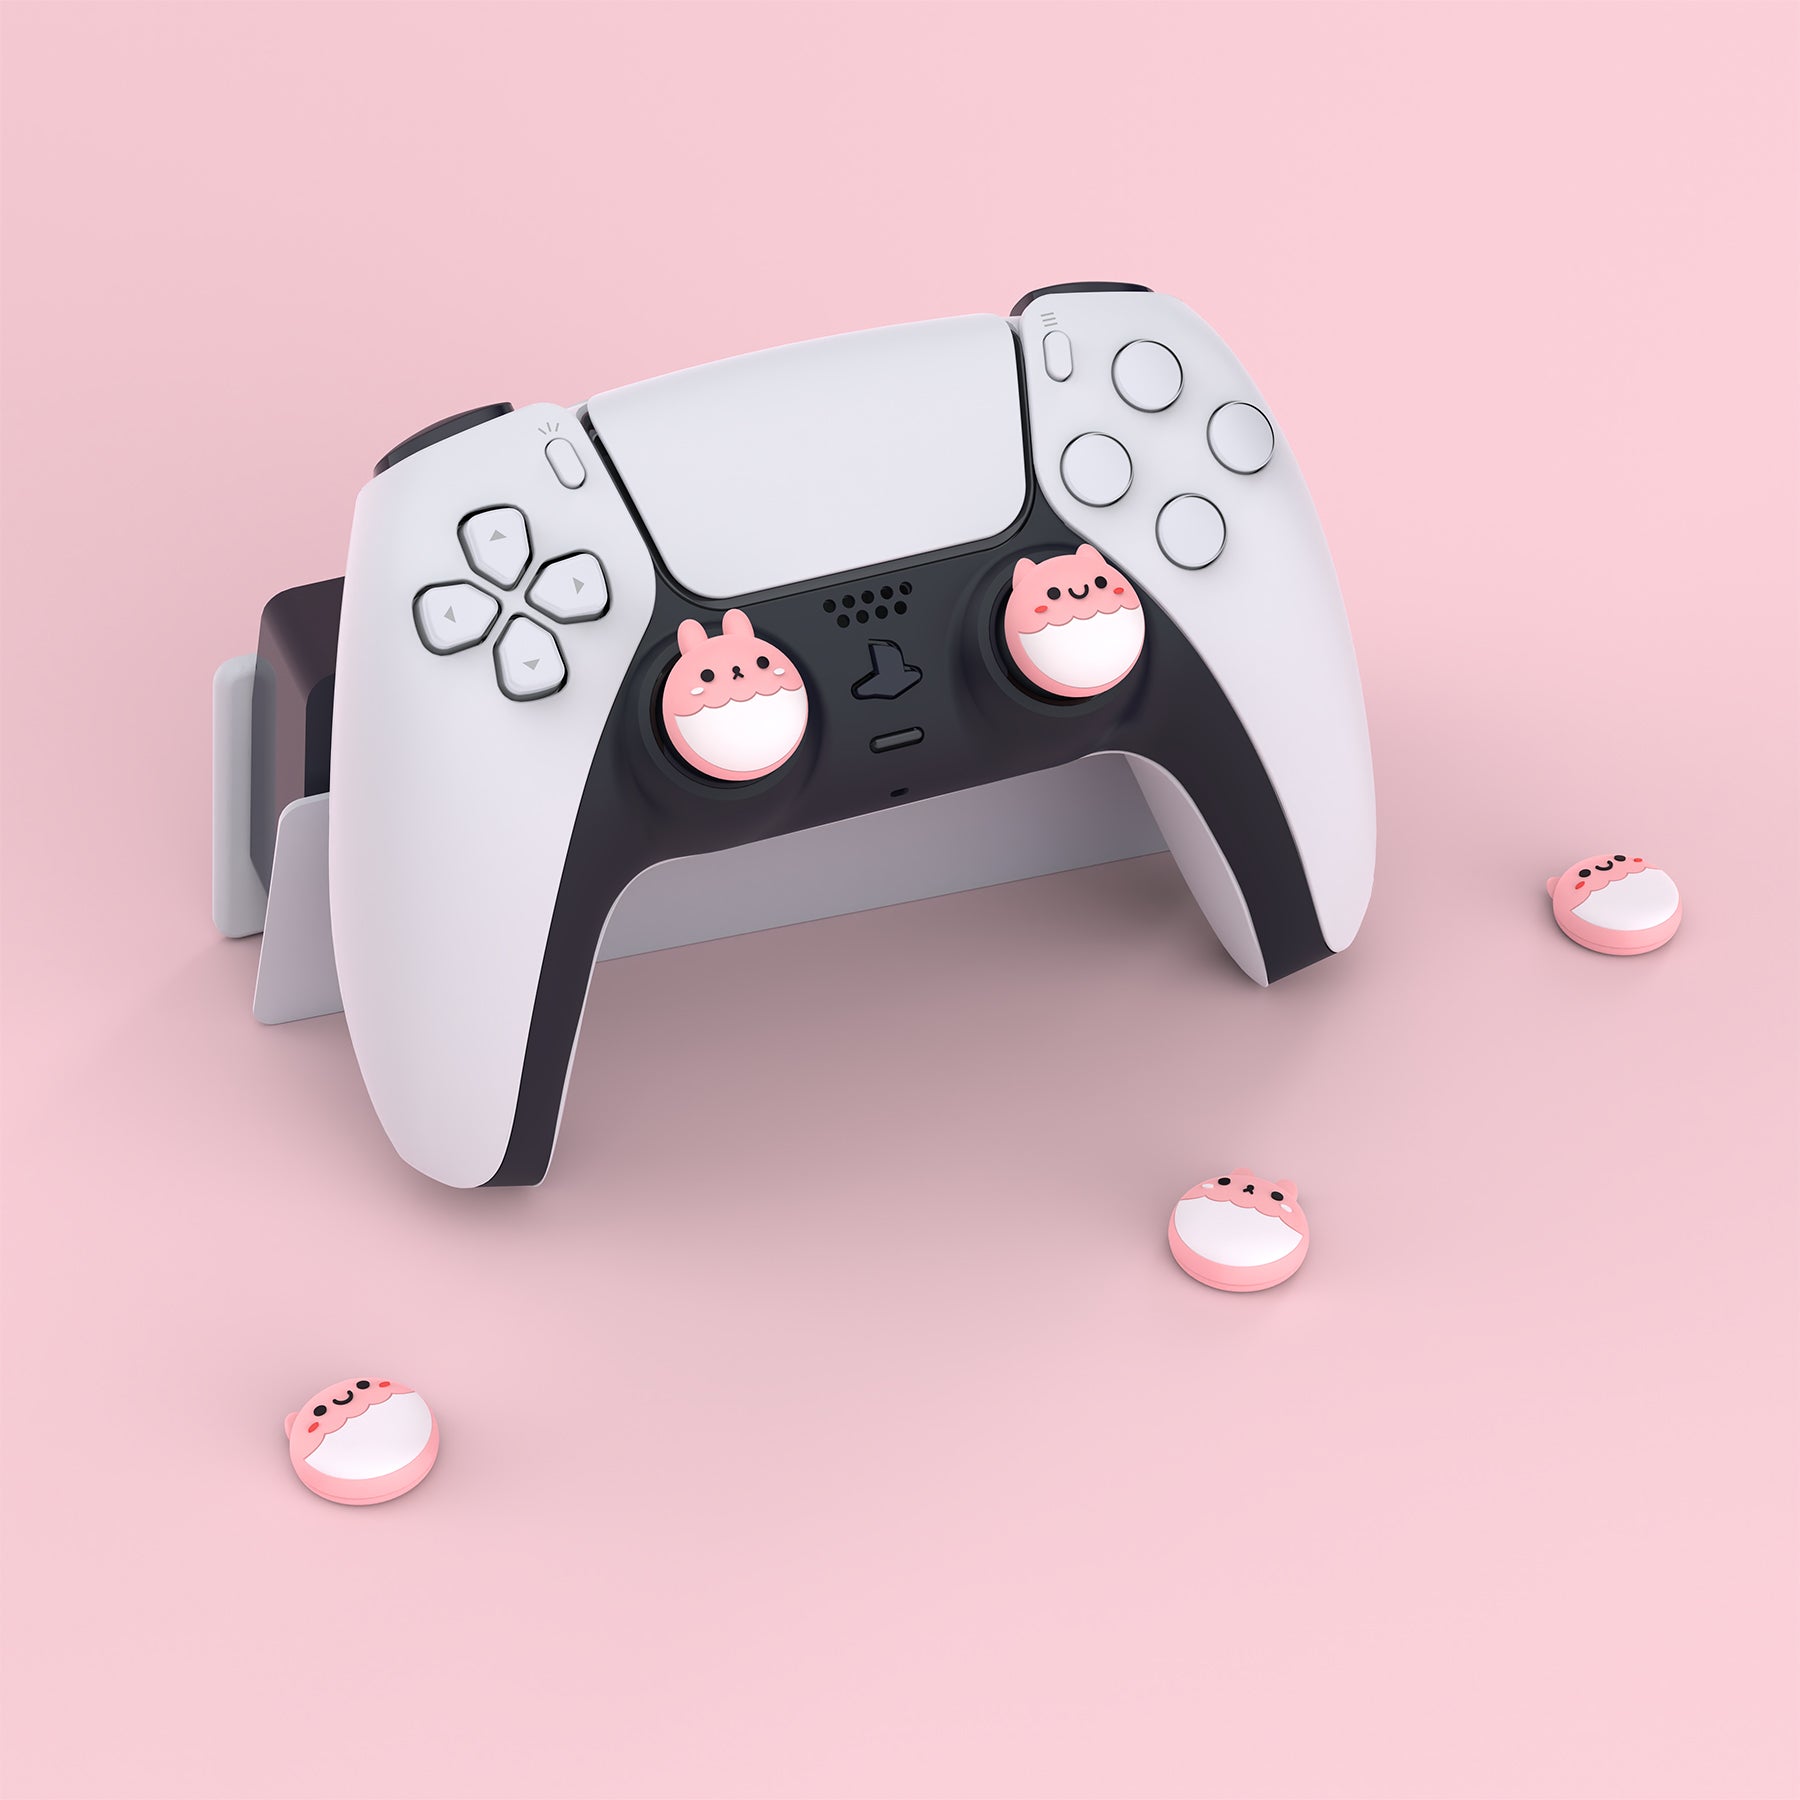 PlayVital Rabbit & Squirrel Cute Thumb Grip Caps for ps5/4 Controller, Silicone Analog Stick Caps Cover for Xbox Series X/S, Thumbstick Caps for Switch Pro Controller - Pale Red - PJM3002 PlayVital